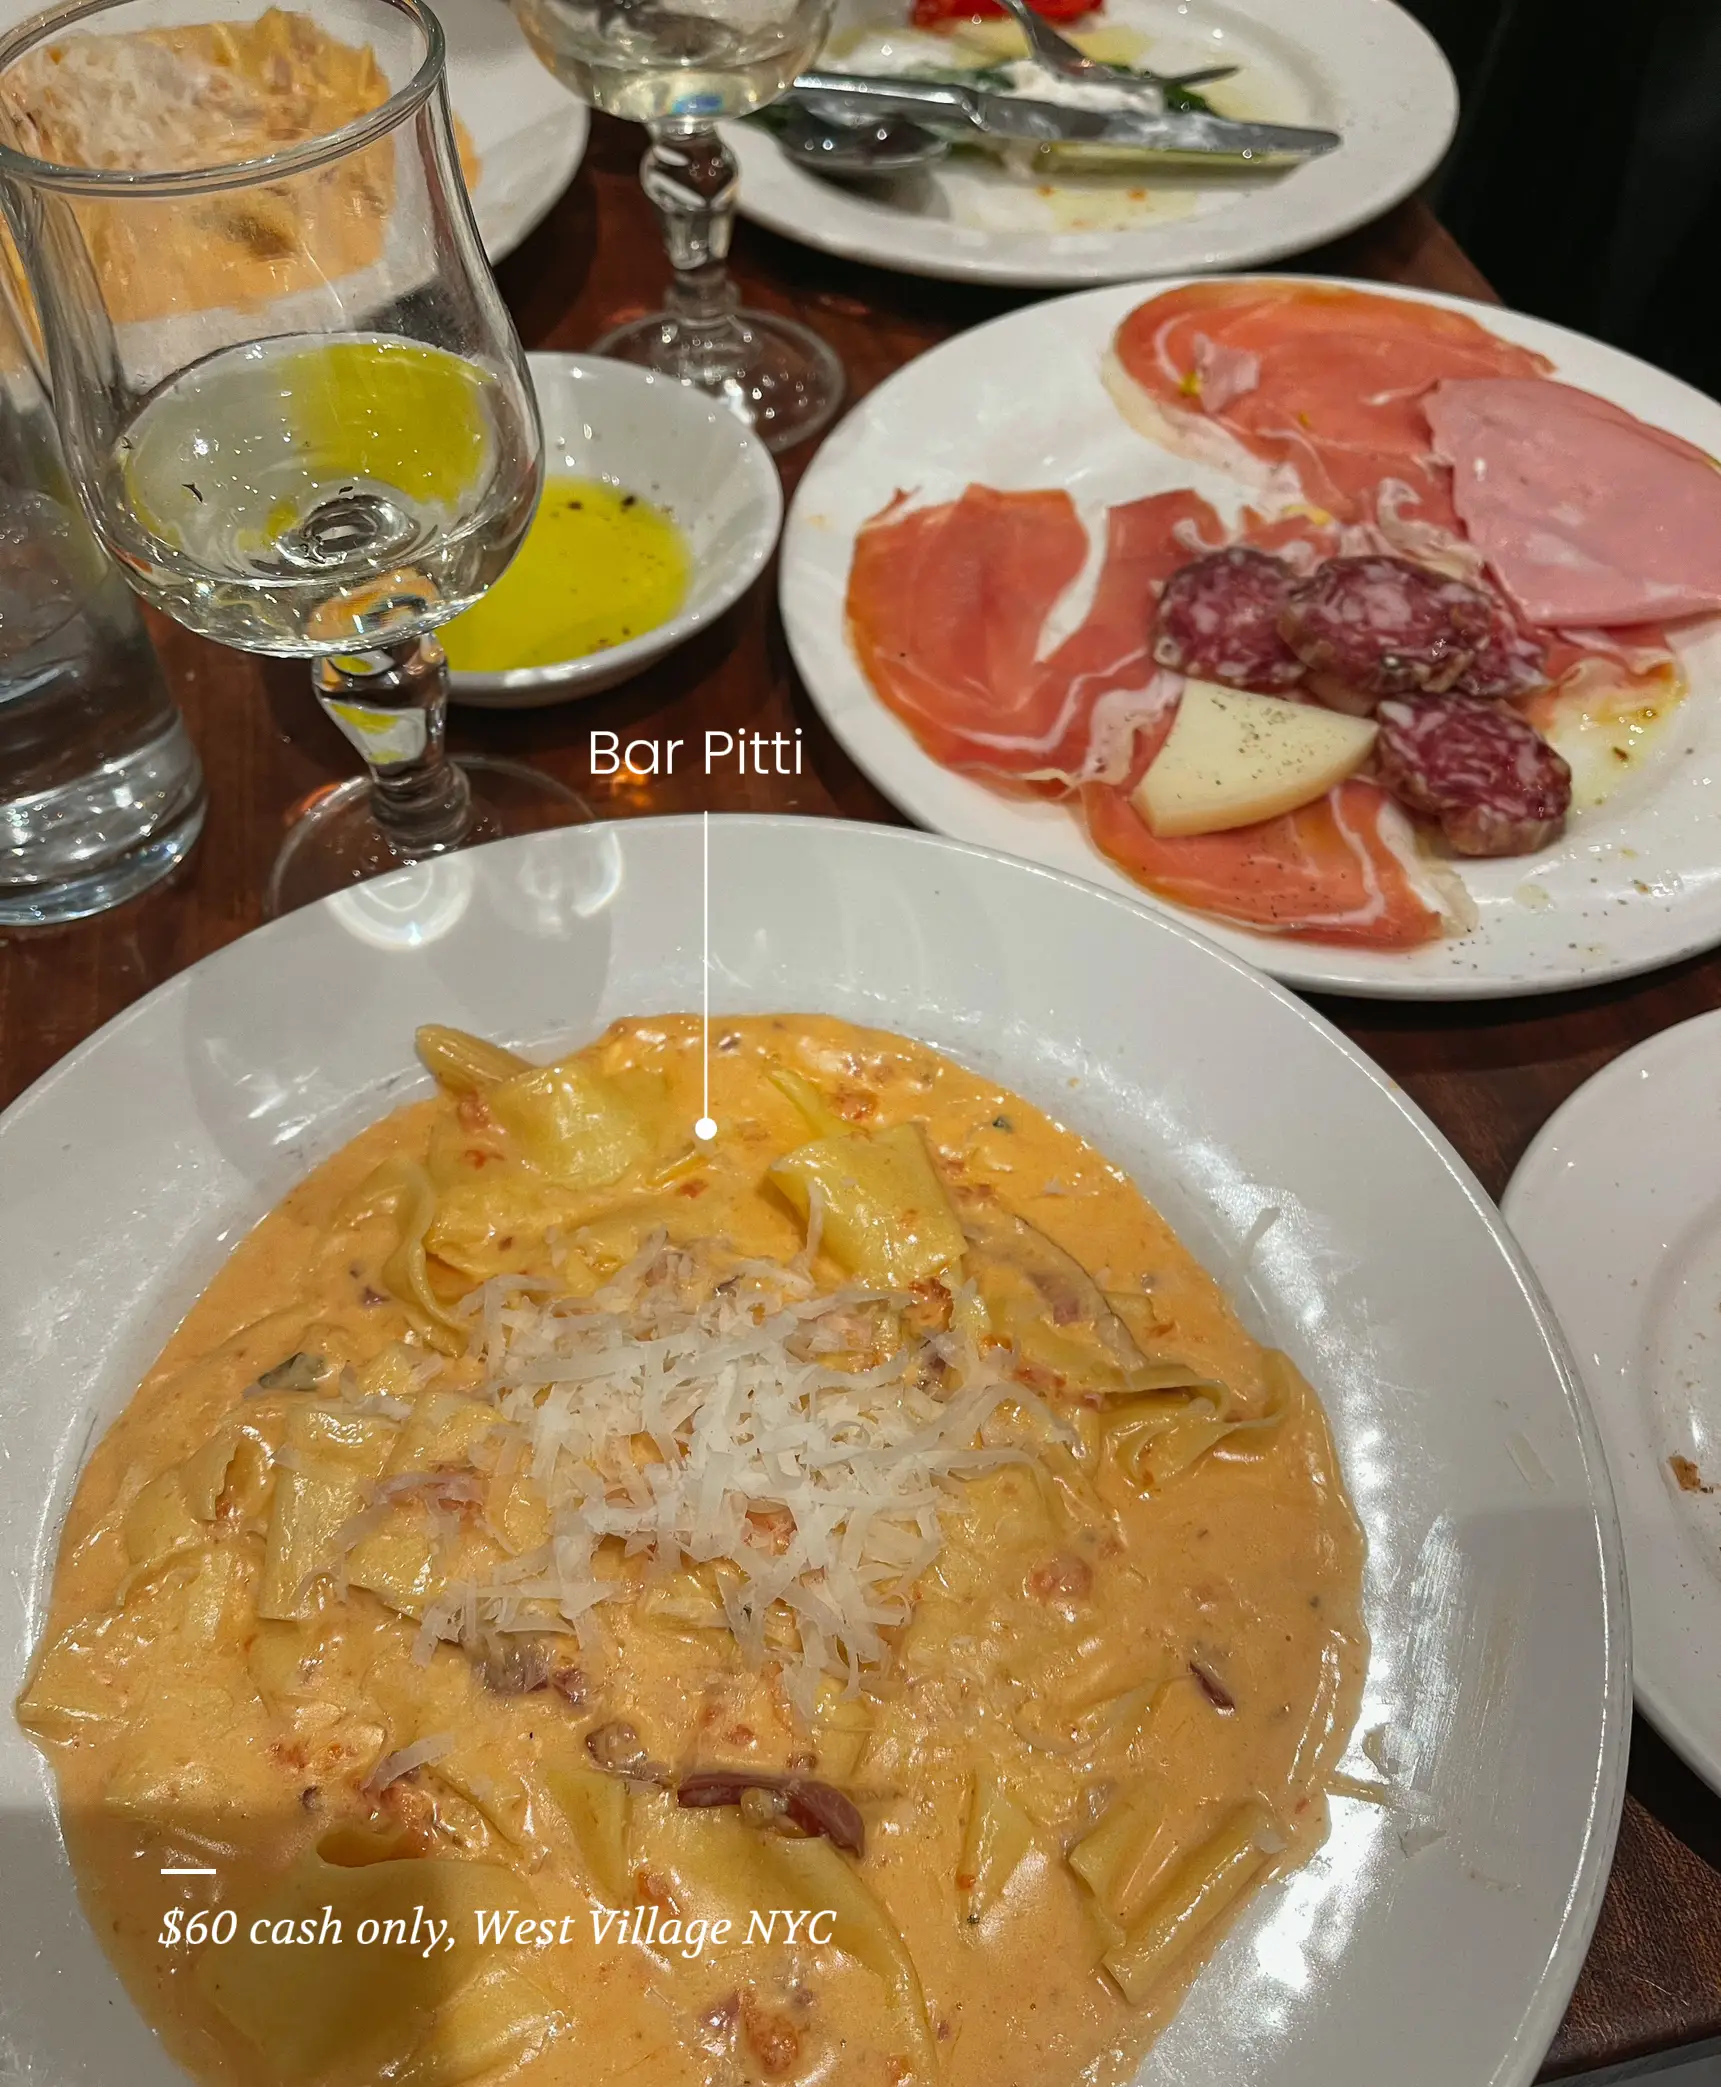  A plate of food with the words "Bar Pitti" on it.